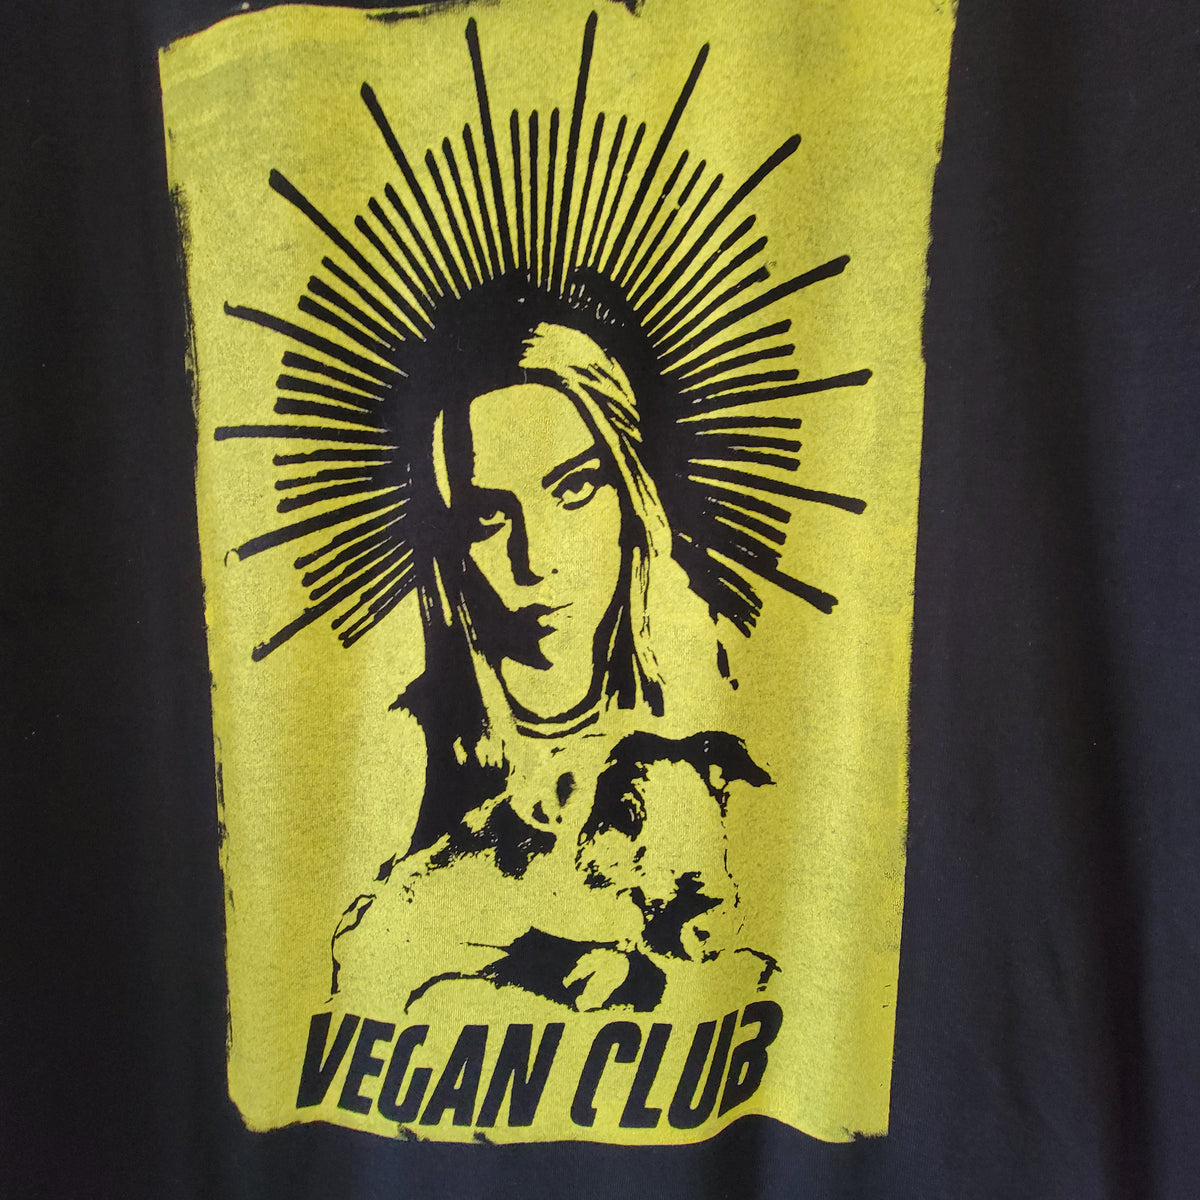 Billie Eilish Halo Vegan Club holding Pig T-shirt with large front design in yellow gold color